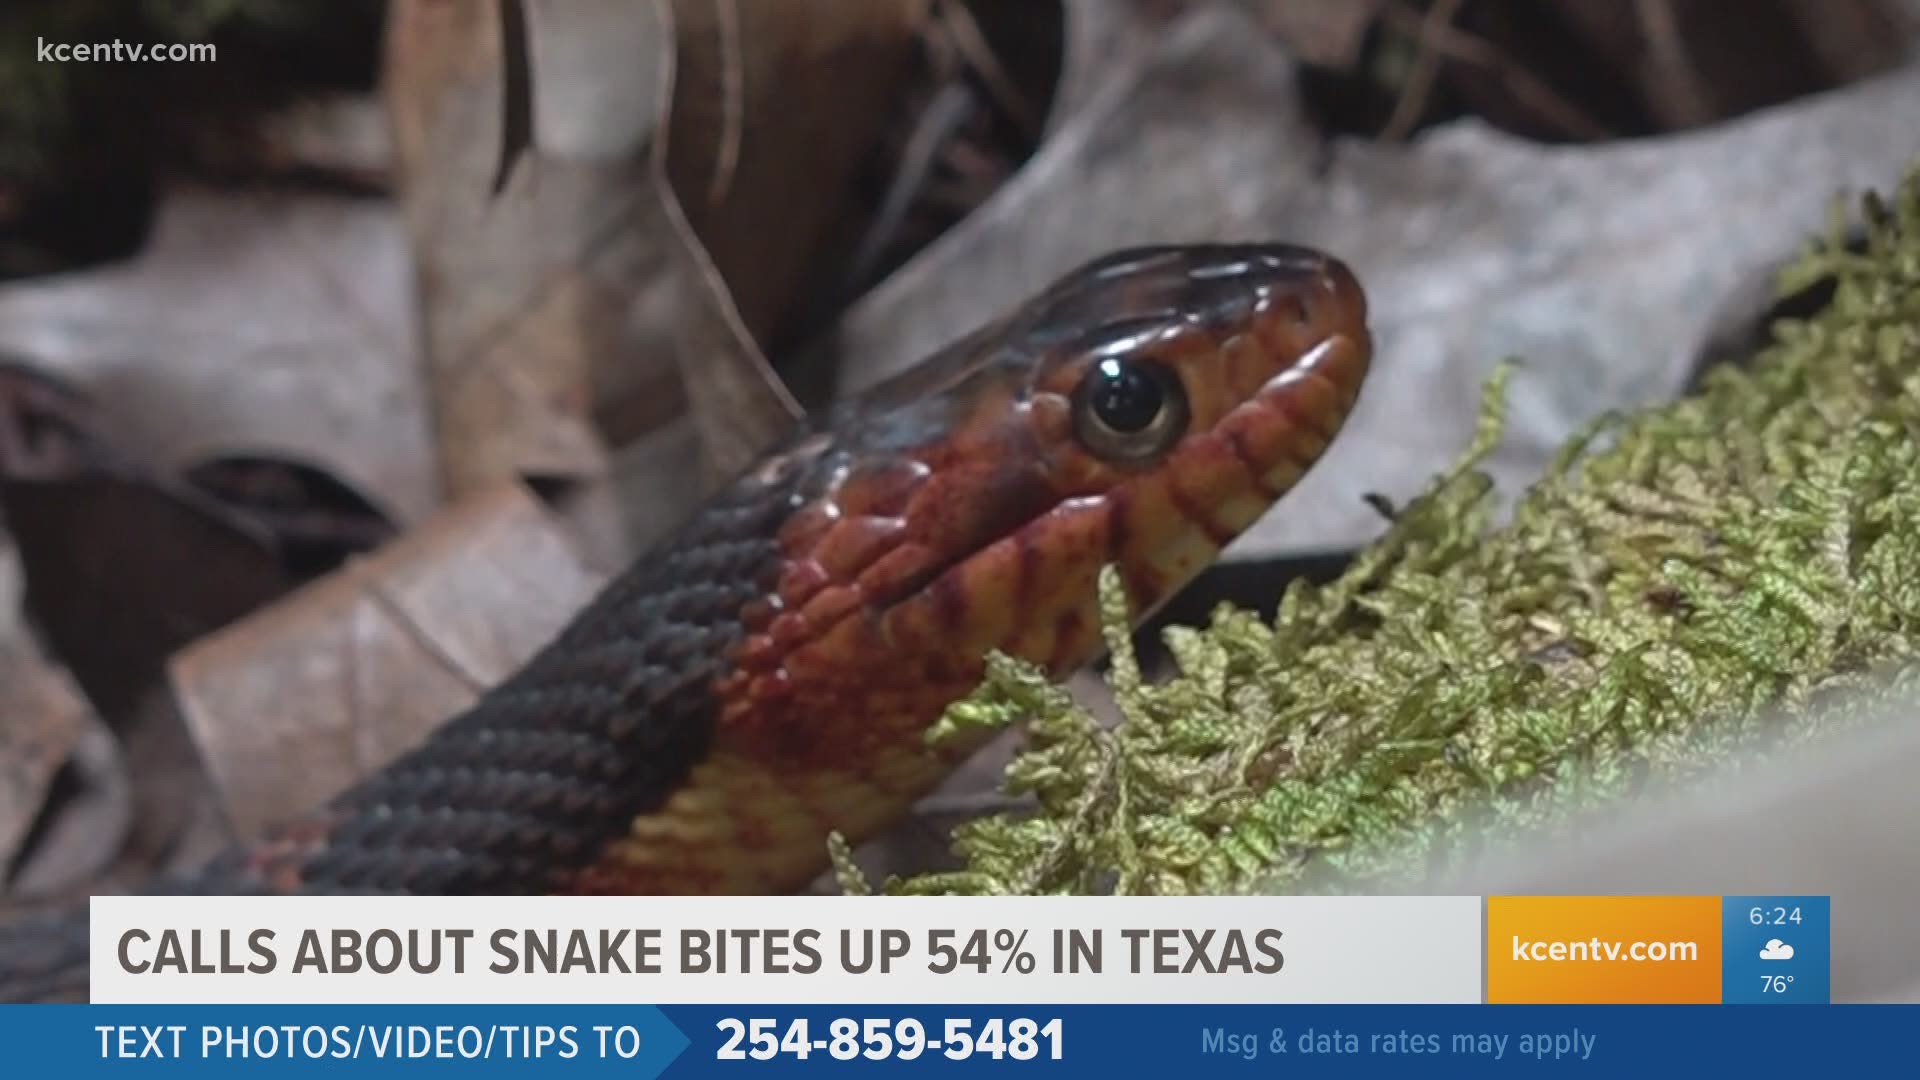 A local expert shows us which species are native to Central Texas, and explains what you should do if you come across one.